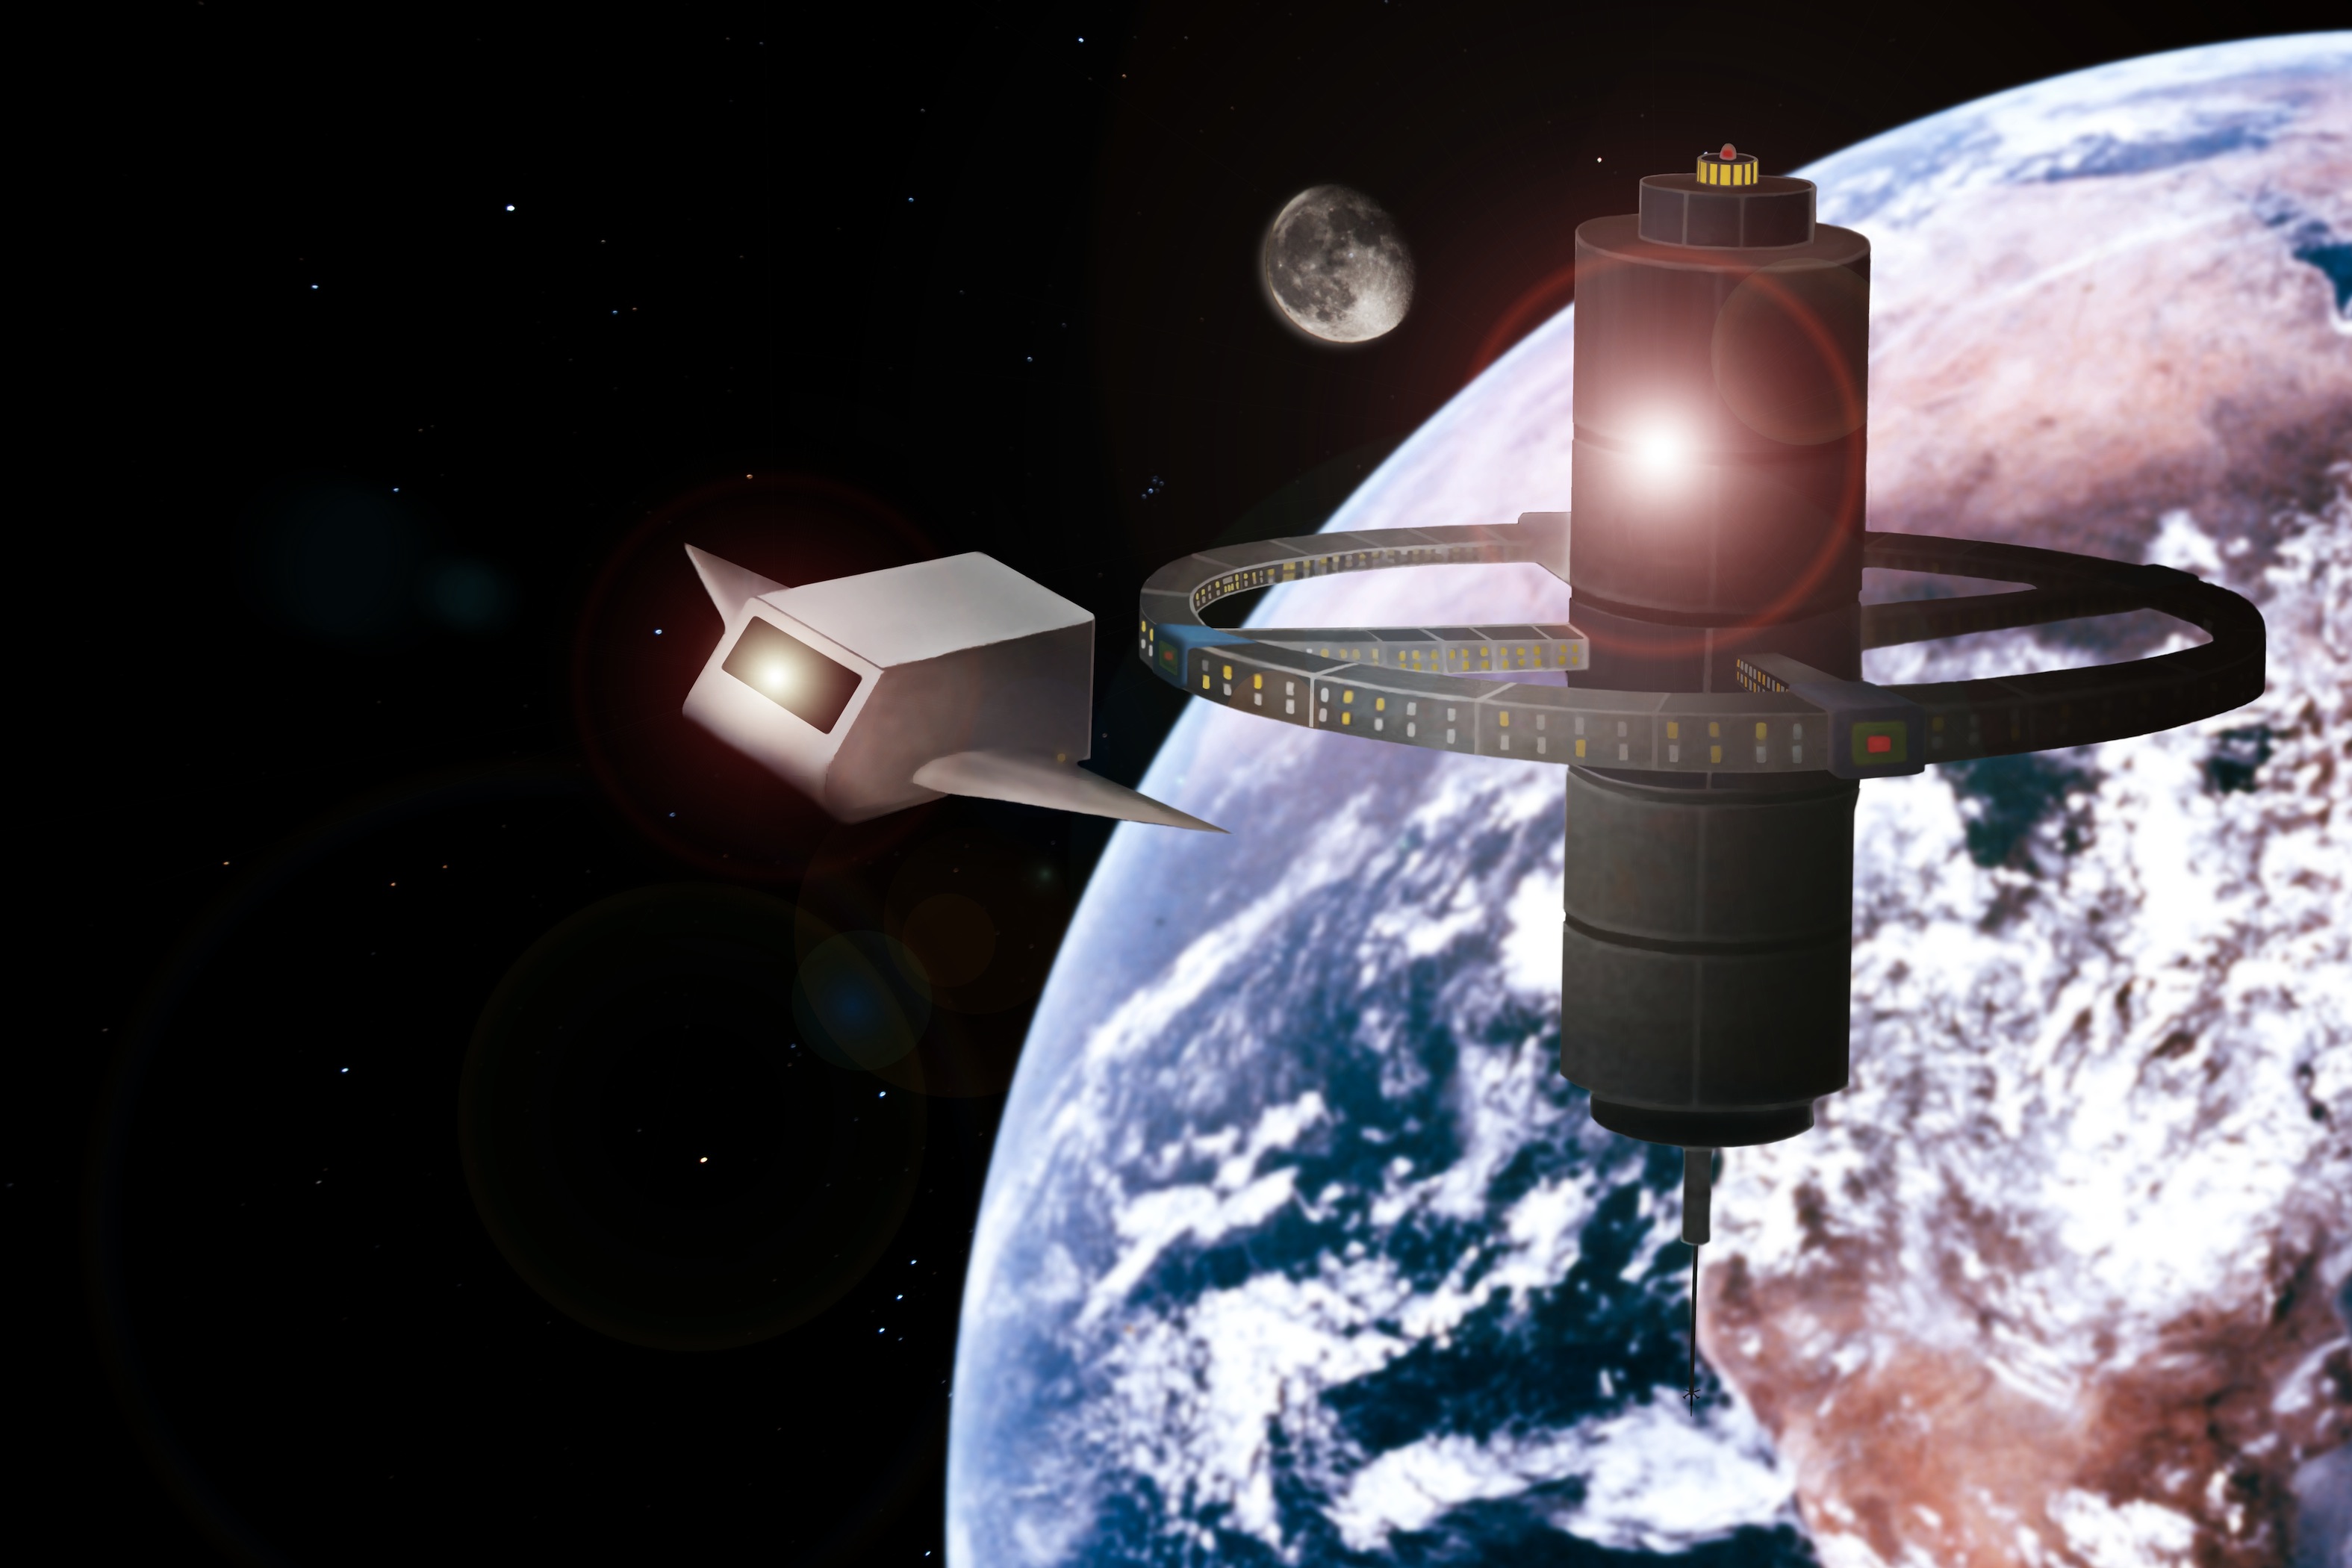 Background image of a space station